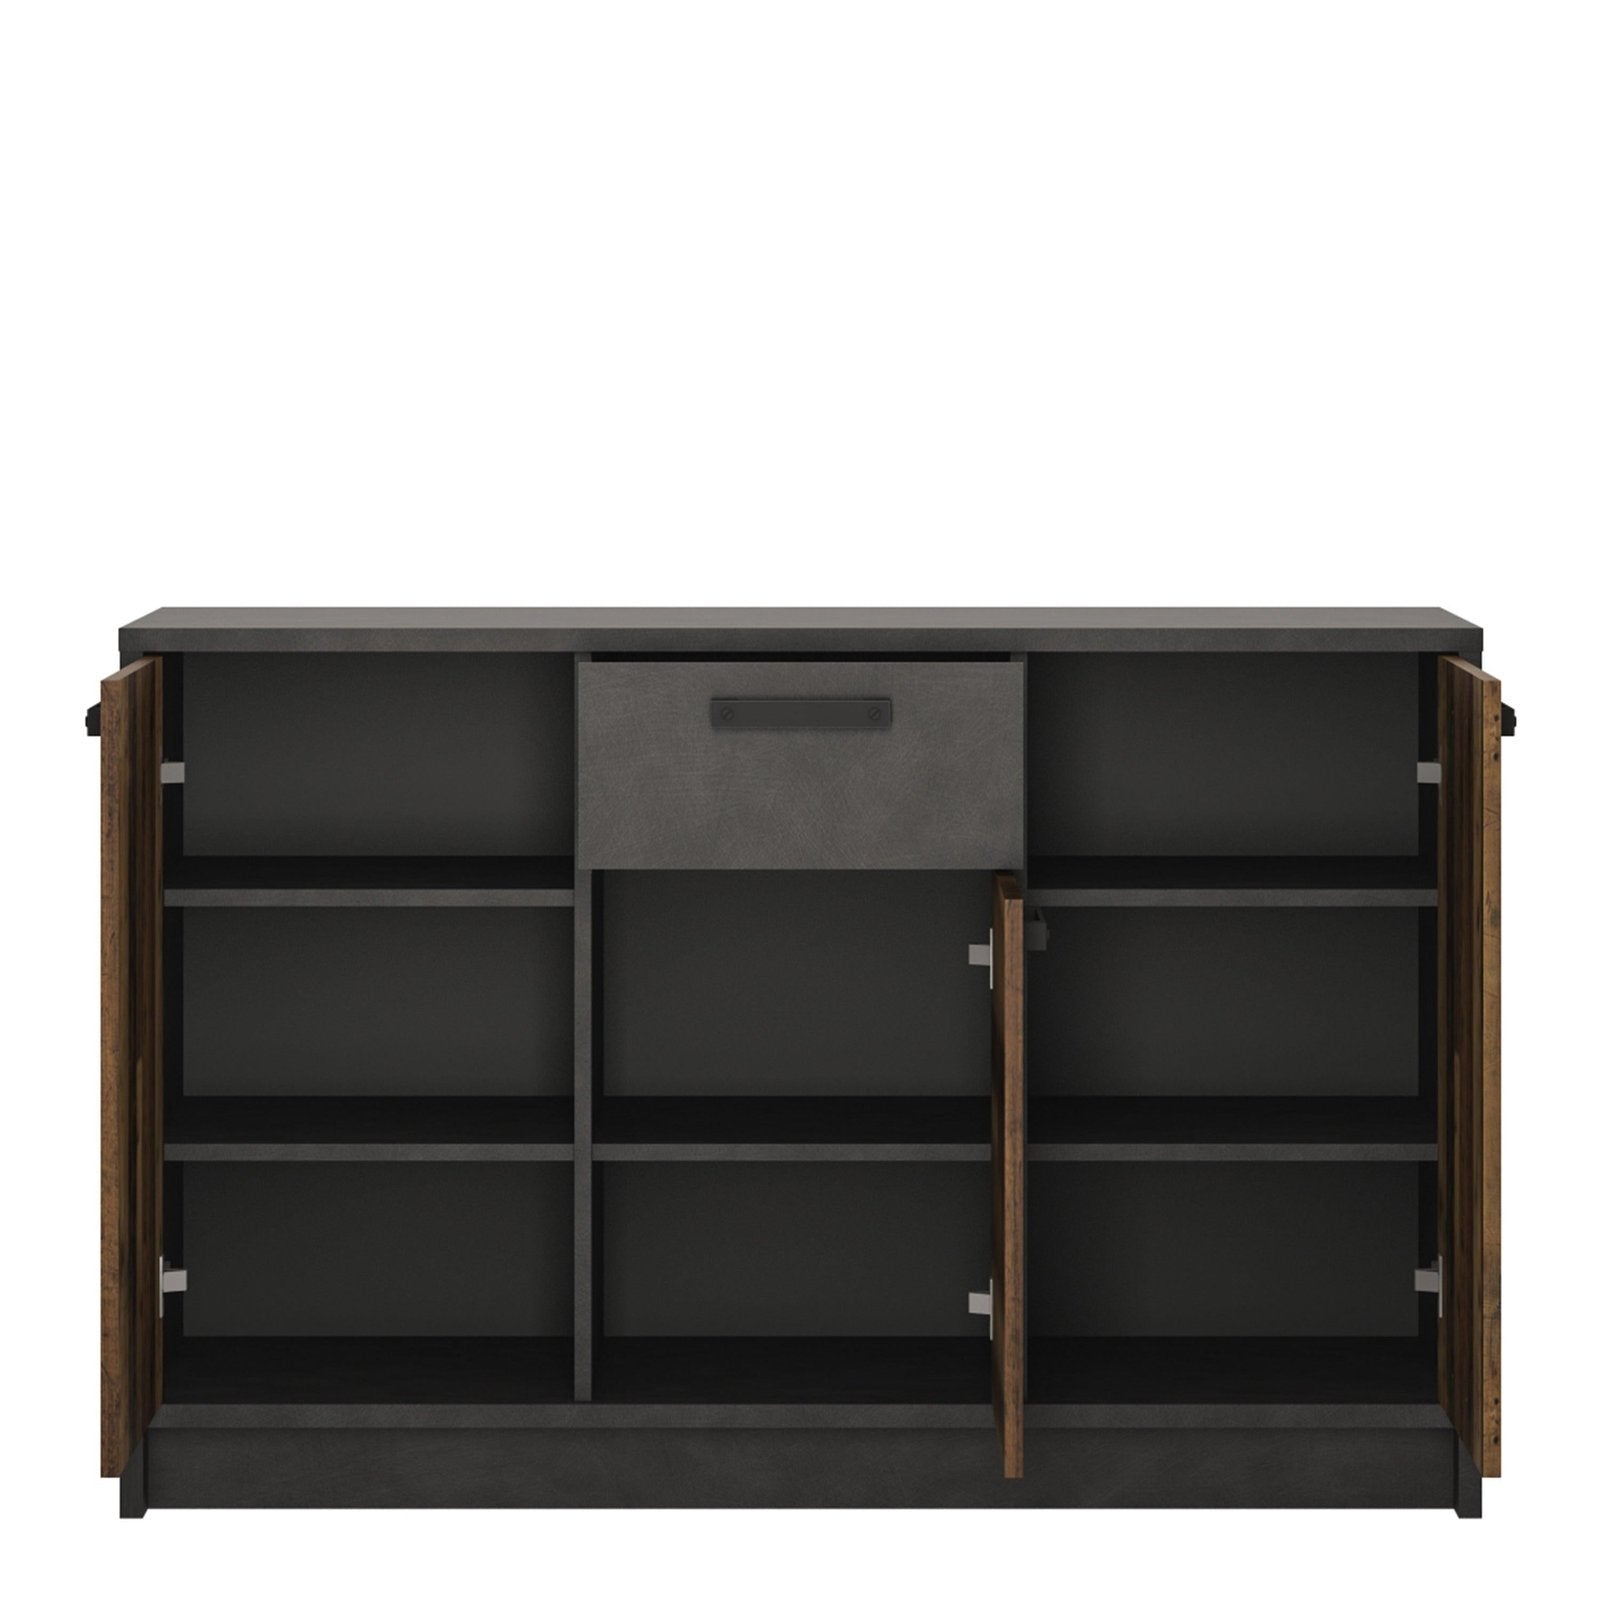 Brooklyn Cabinet with 3 Doors and 1 Drawer in Walnut and Dark Matera Grey